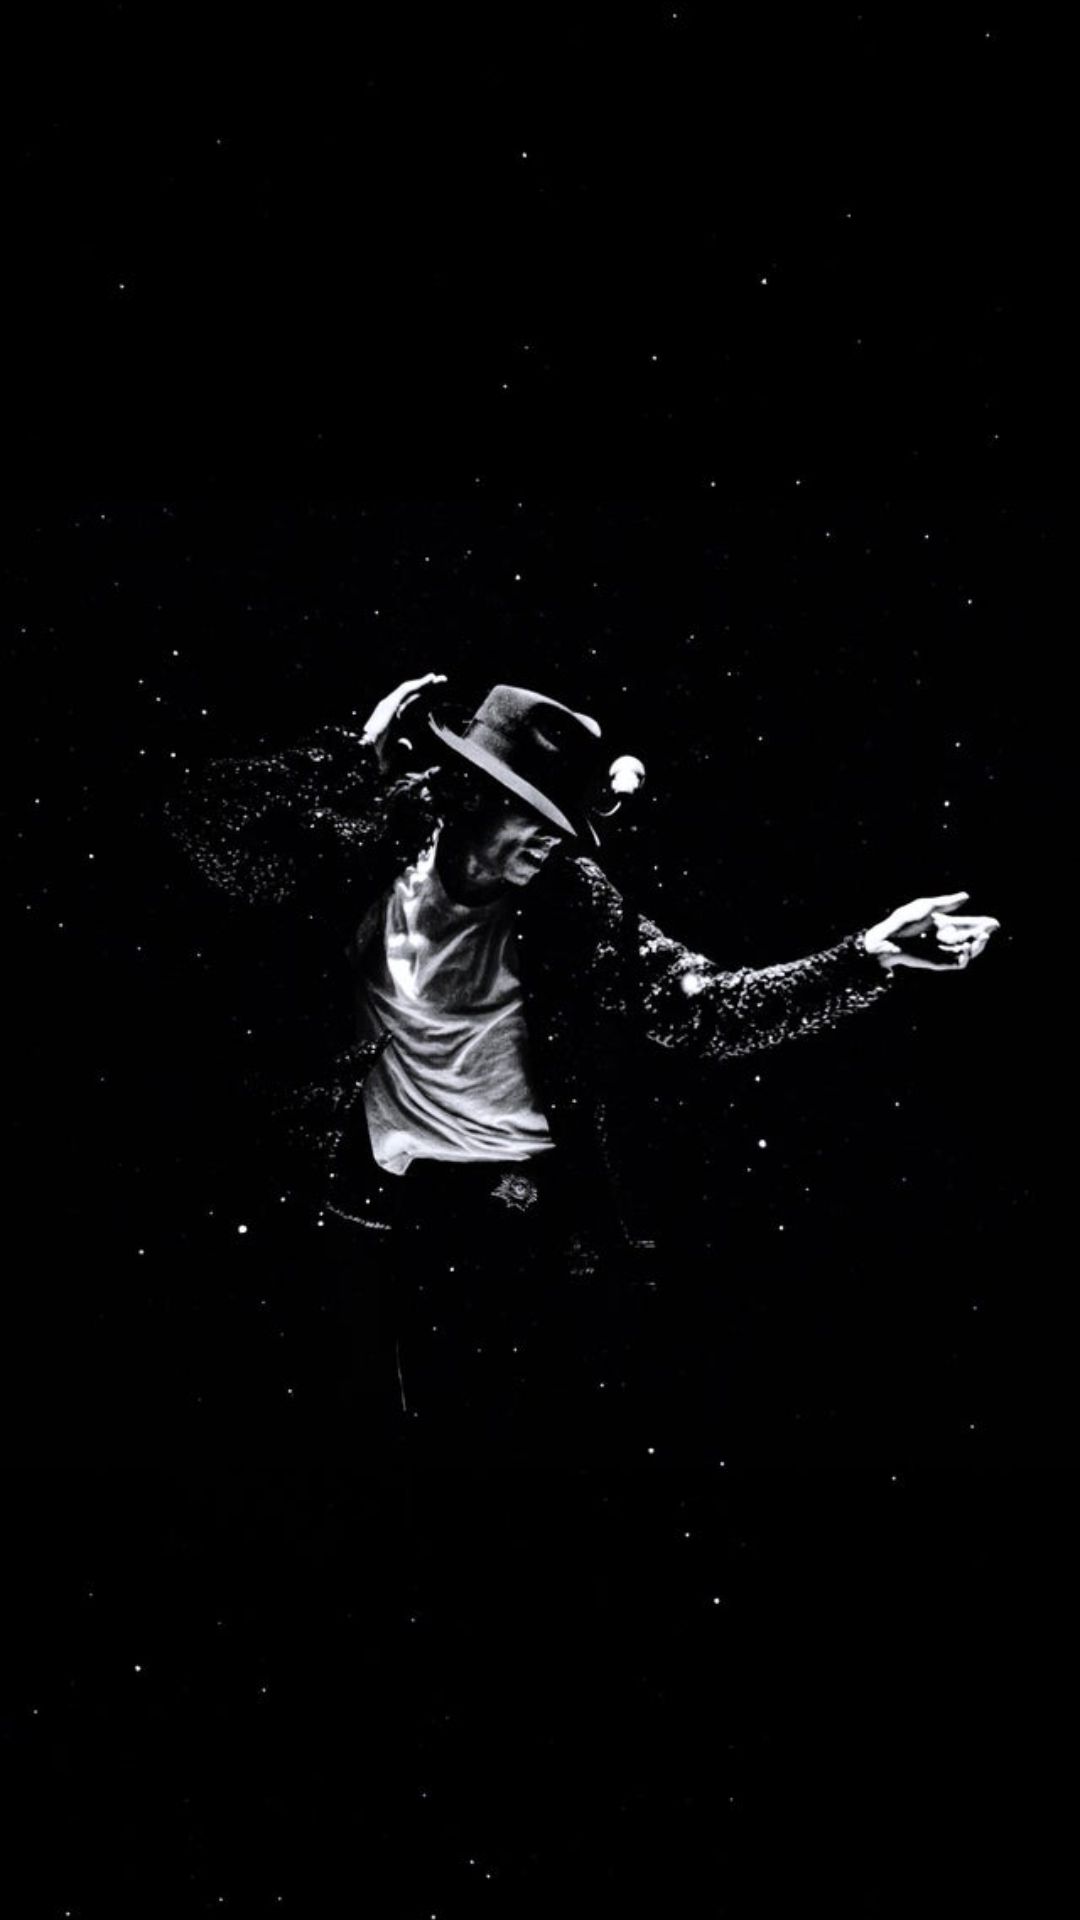 Michael Jackson Iphone Wallpaper with high-resolution 1080x1920 pixel. You can use this wallpaper for your iPhone 5, 6, 7, 8, X, XS, XR backgrounds, Mobile Screensaver, or iPad Lock Screen - Michael Jackson